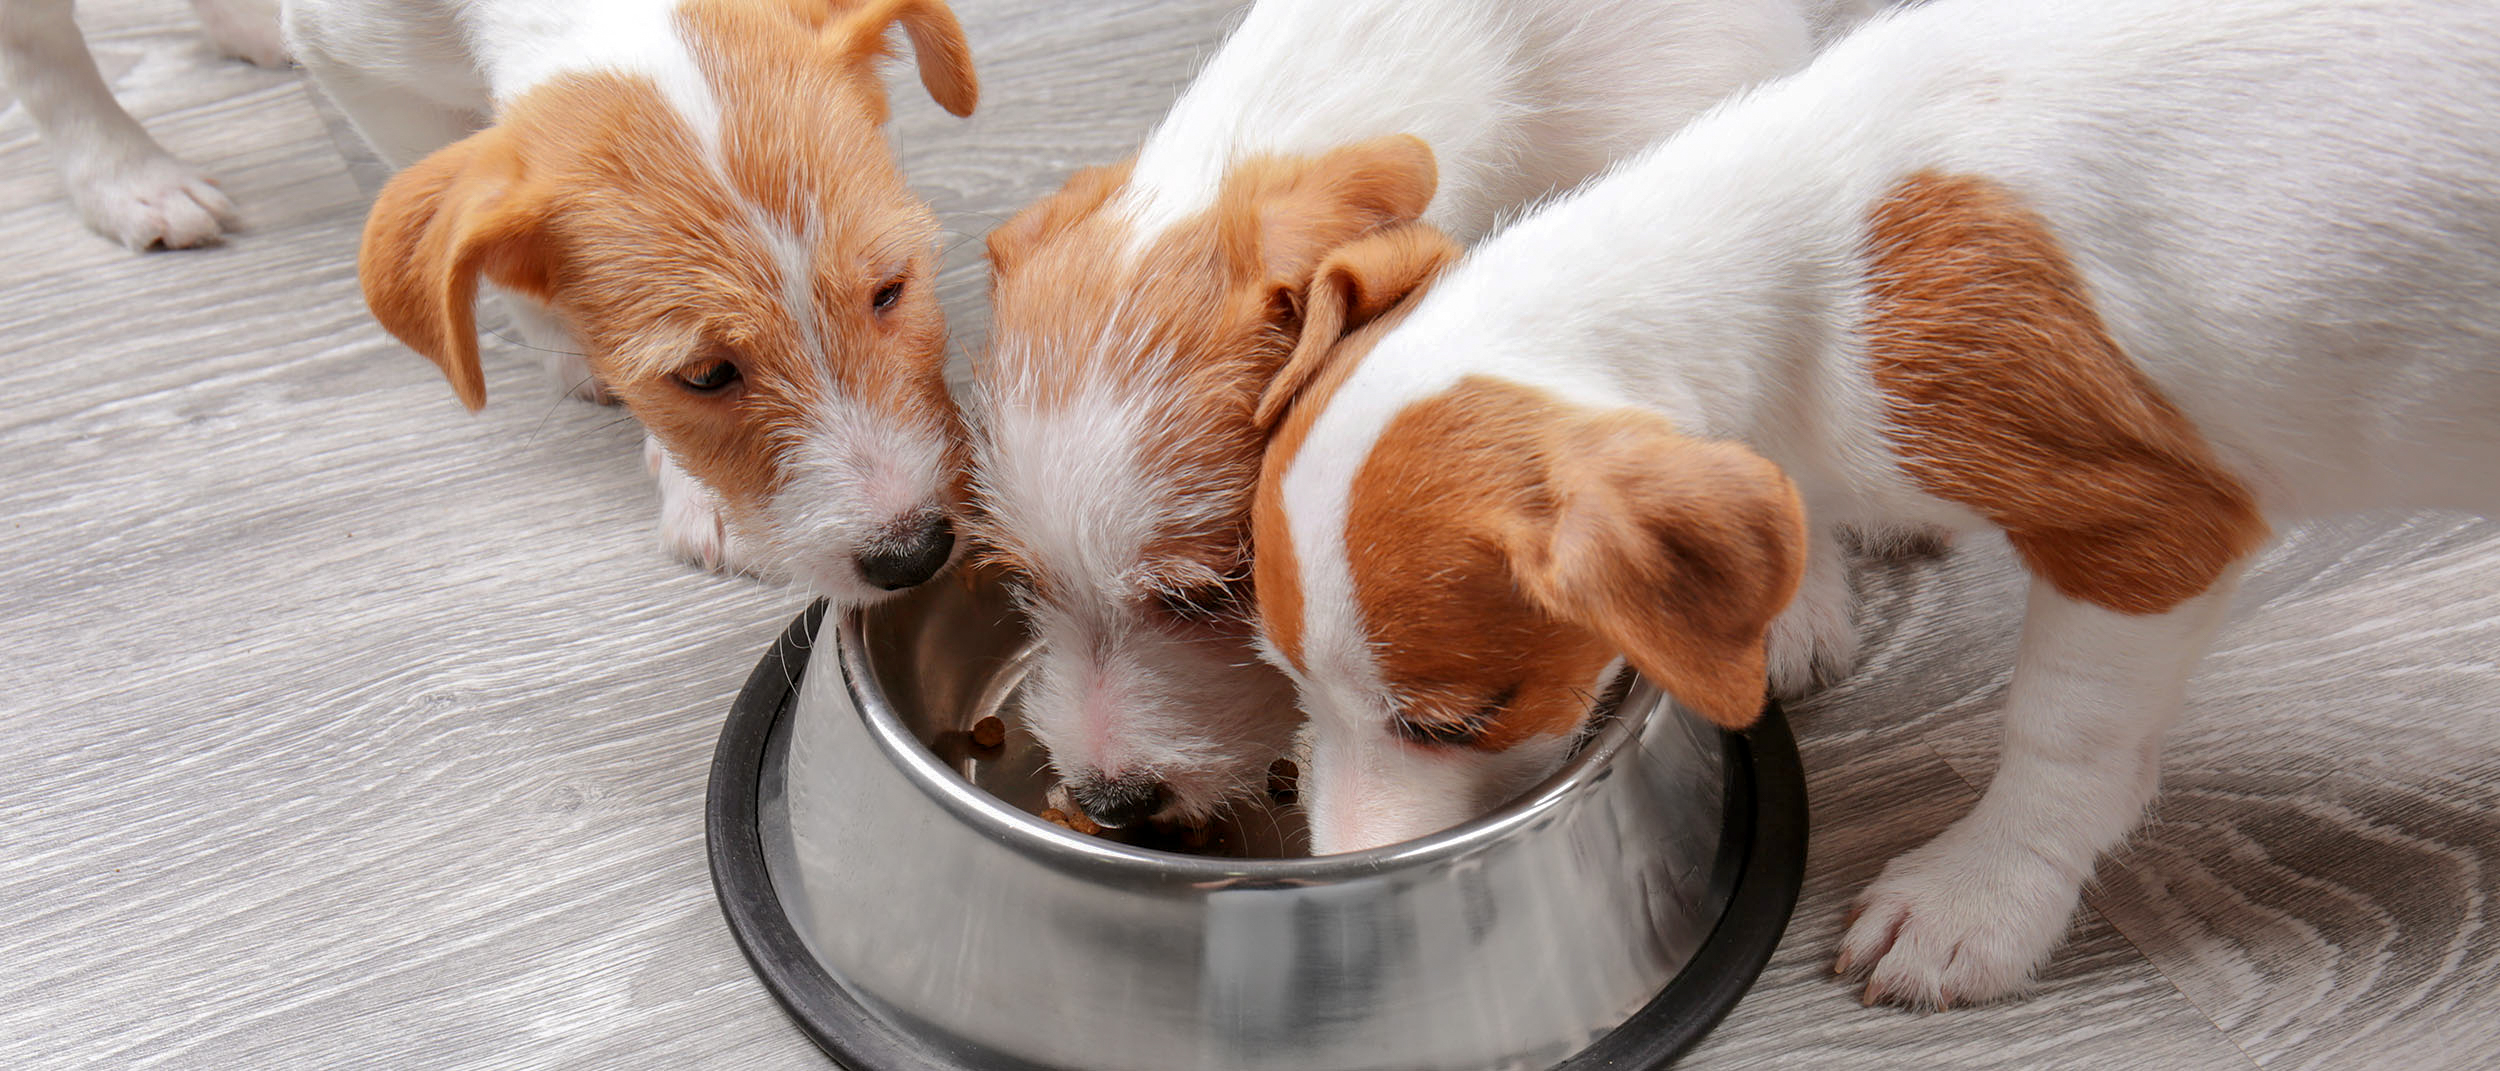 Three puppies standing in a kitchen eating from the same silver bowl.